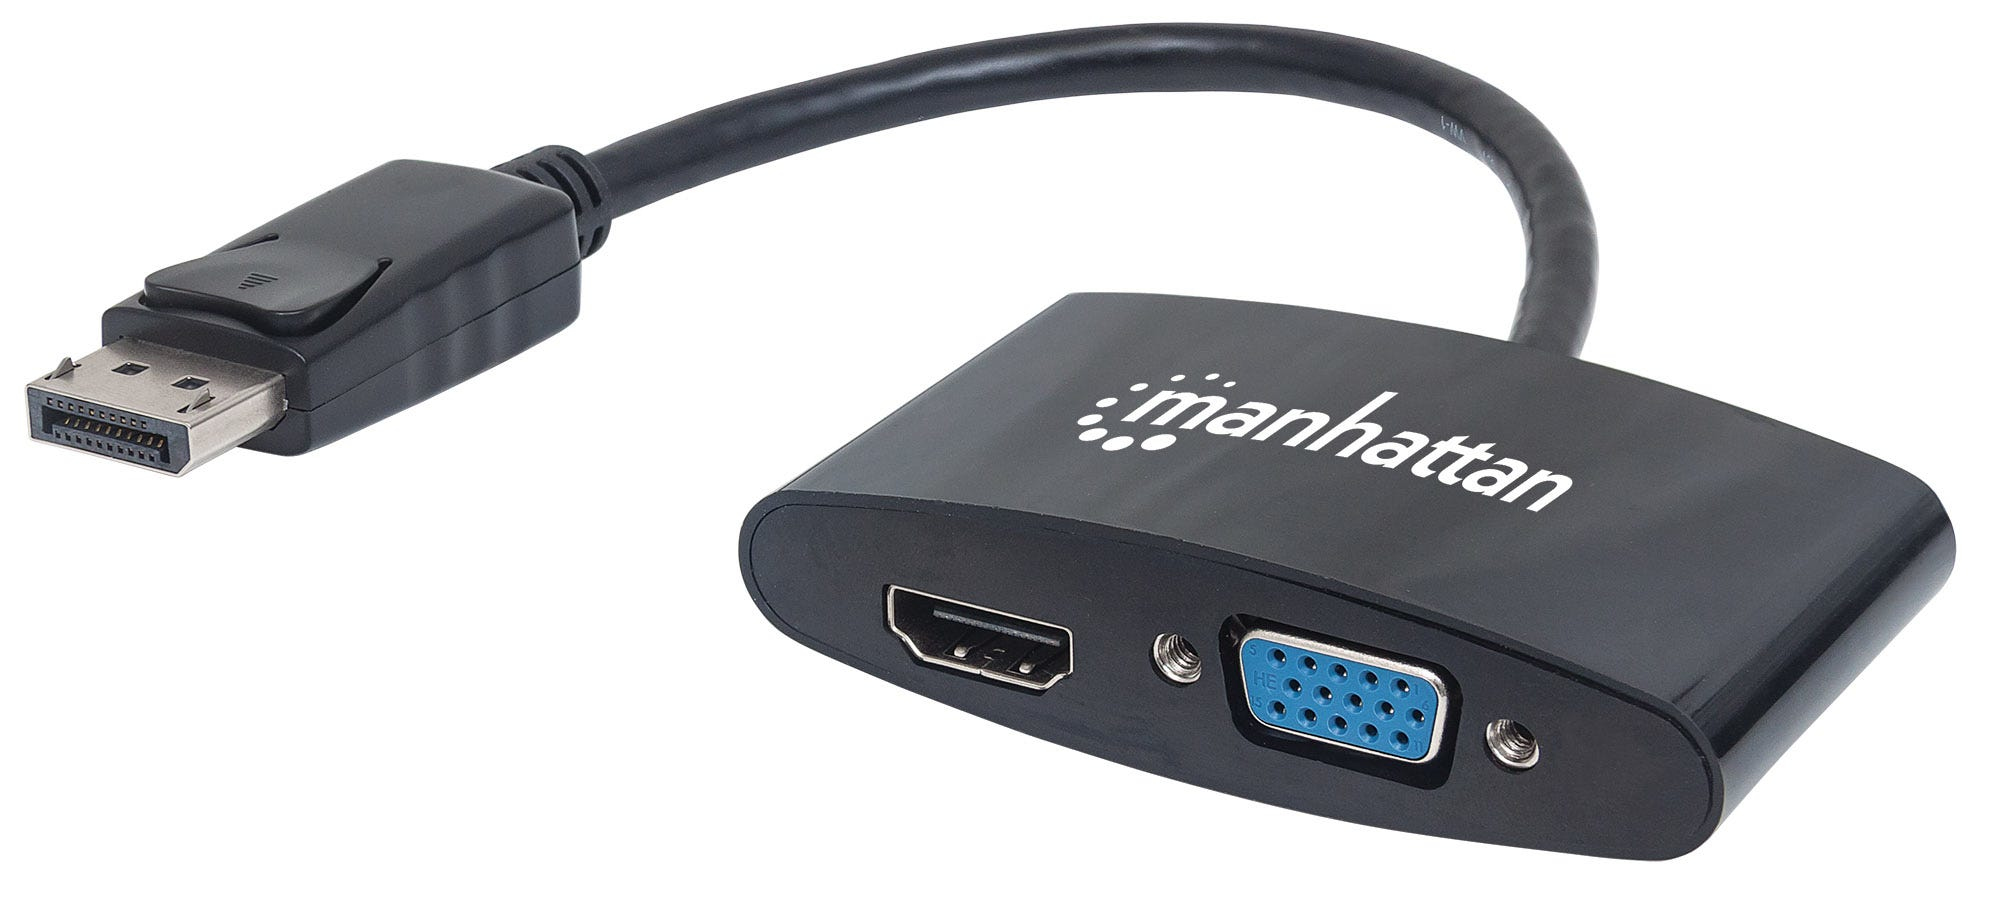 Manhattan DisplayPort 1.2 to HDMI and VGA Adapter Cable, 2-in-1, Male to Female, Black, Equivalent to Startech DP2HDVGA, HDMI 4K@30Hz, VGA 1080p (1920x1200p), Passive, 16cm, Lifetime Warranty, Blister